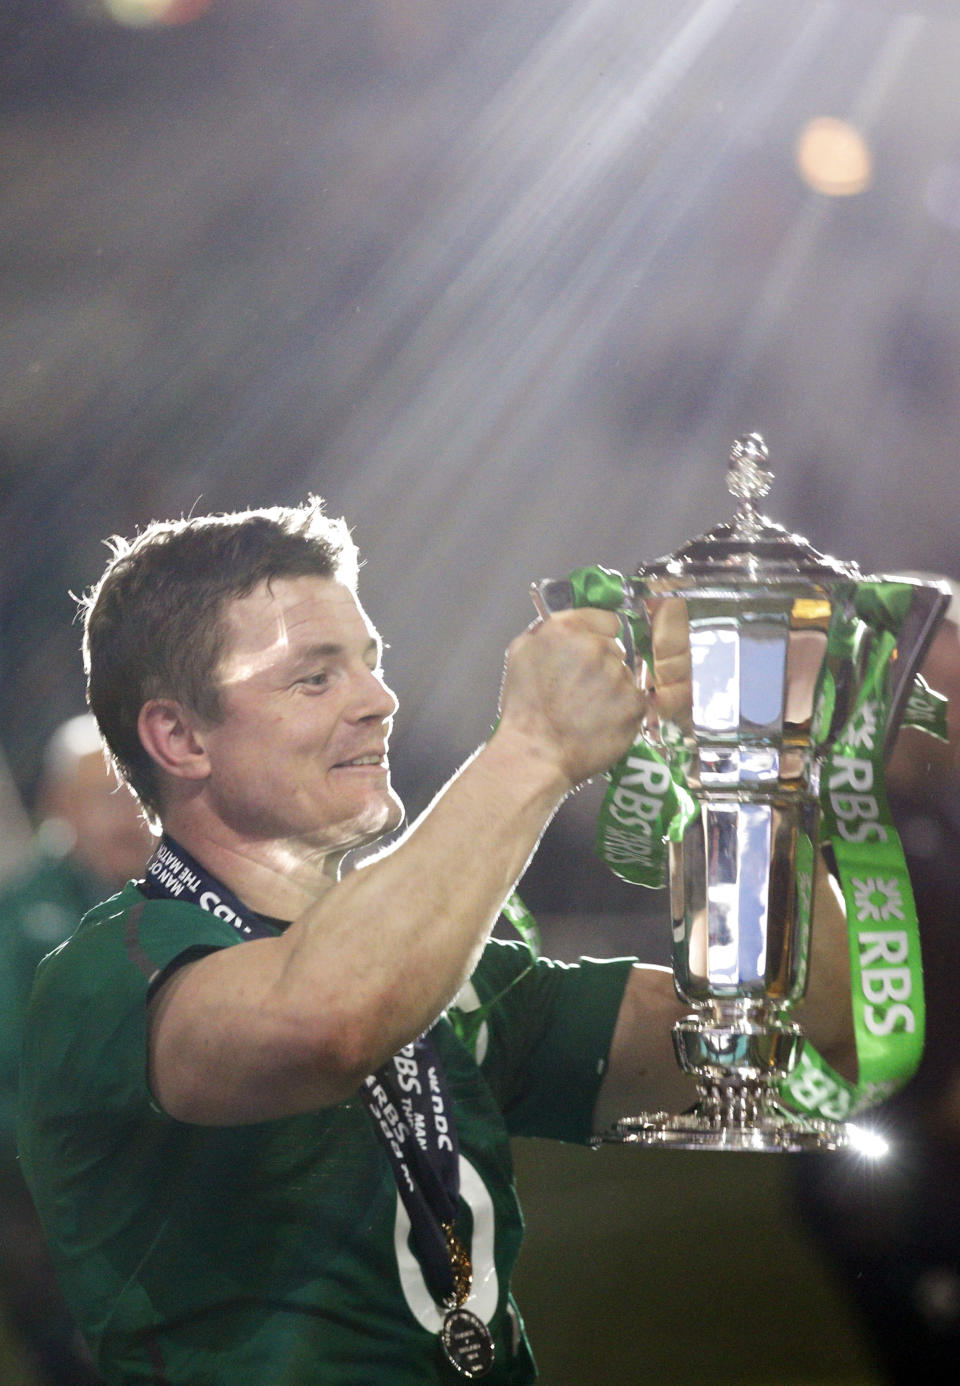 Ireland's Brian O'Driscoll celebrates with the trophy after defeating France and winning the Six Nations Rugby Union tournament at the Stade de France stadium, in Saint Denis, outside Paris, Saturday, March 15, 2014. (AP Photo/Christophe Ena)